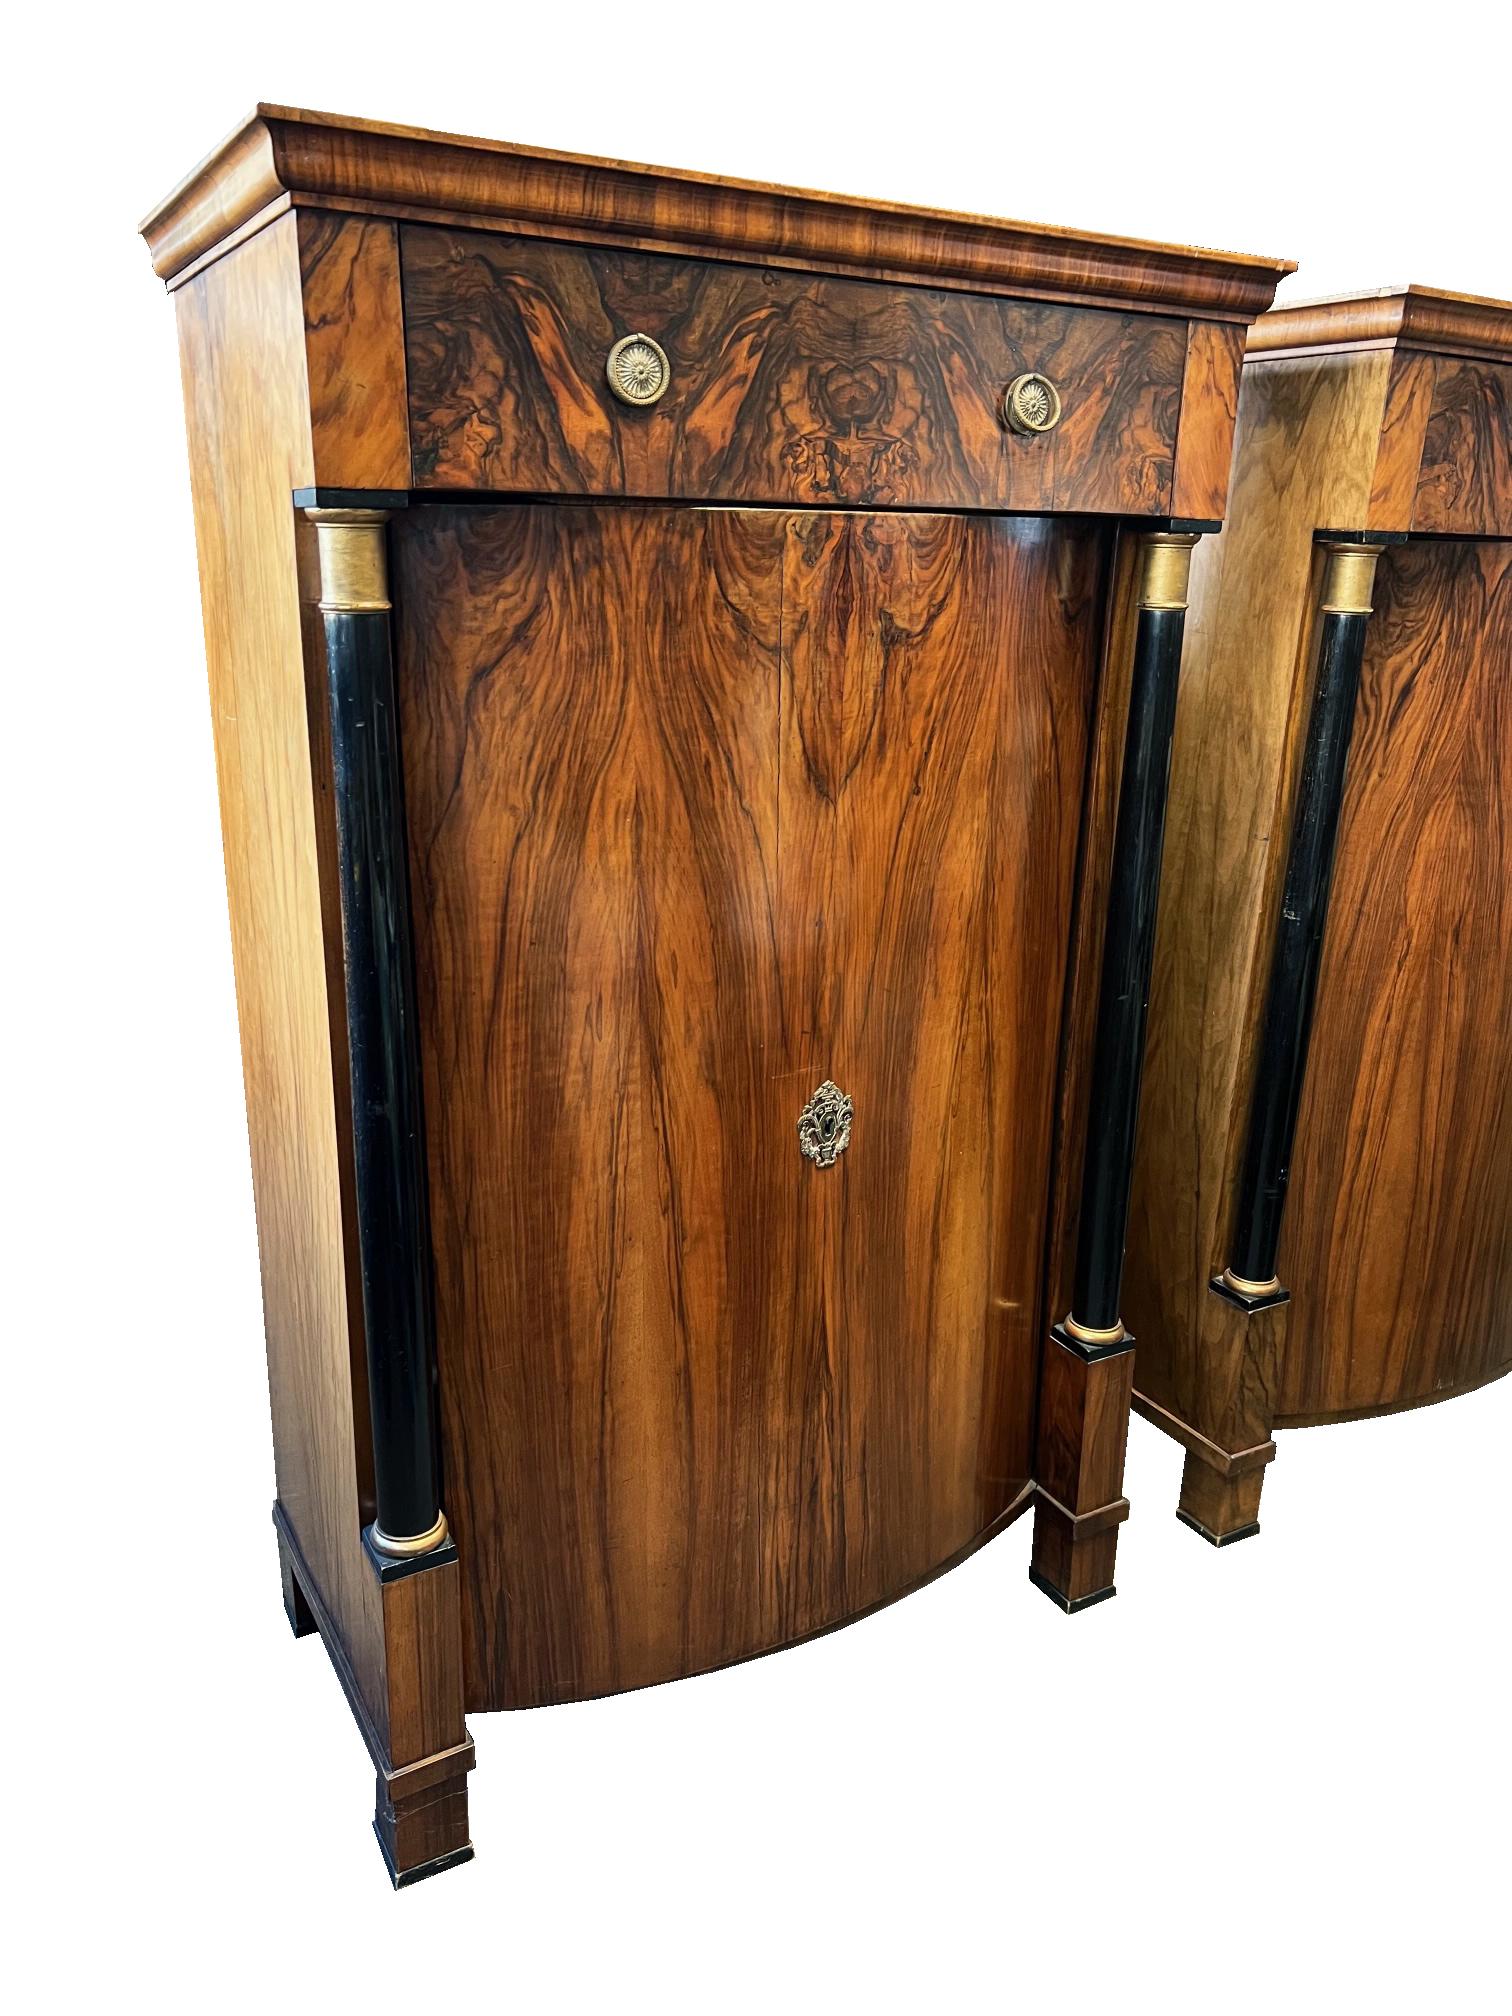 Hello,
This stunning pair of Biedermeier trumeau cabinets ware made in Vienna circa 1825.

Viennese Biedermeier is distinguished by their sophisticated proportions, rare and refined design and excellent craftsmanship and continue to have a great